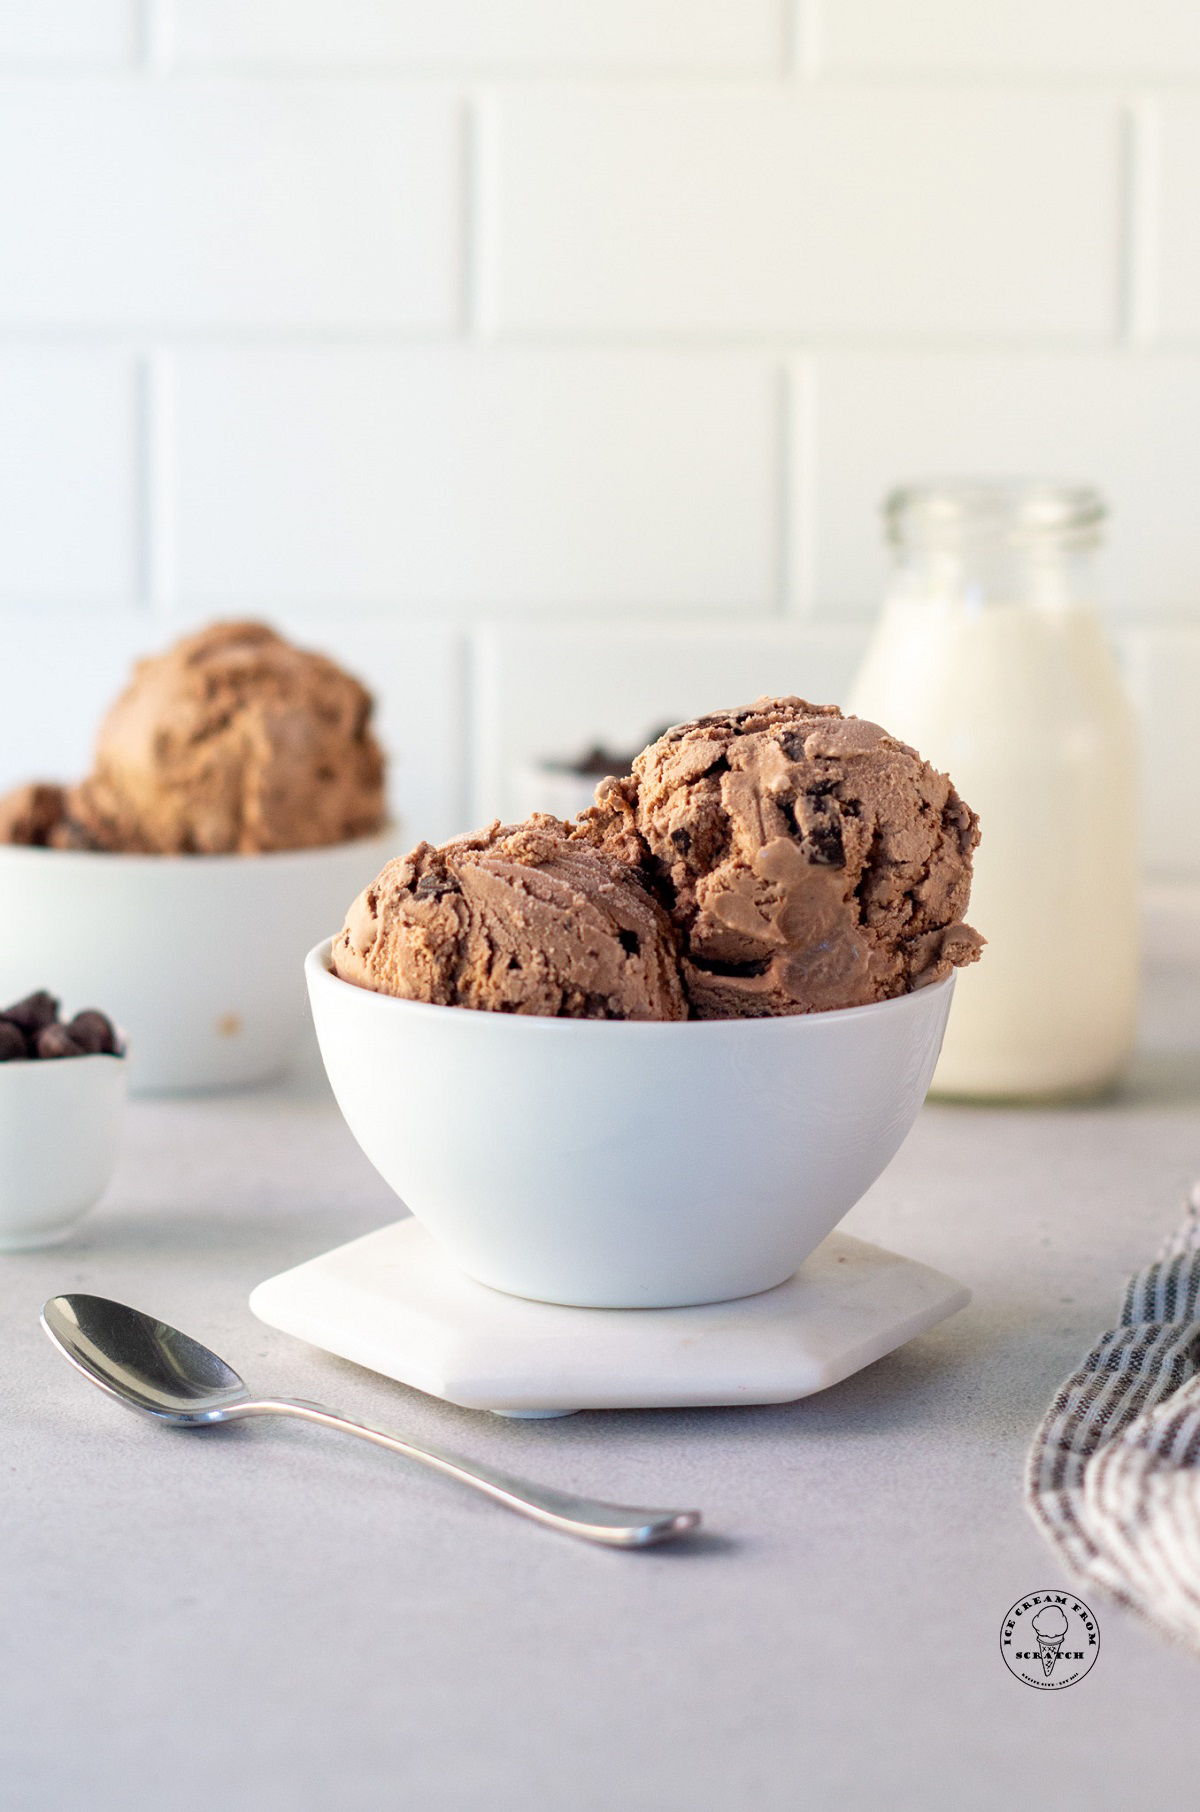 a white bowl holding scoops of homemade chocolate chocolate chip ice cream